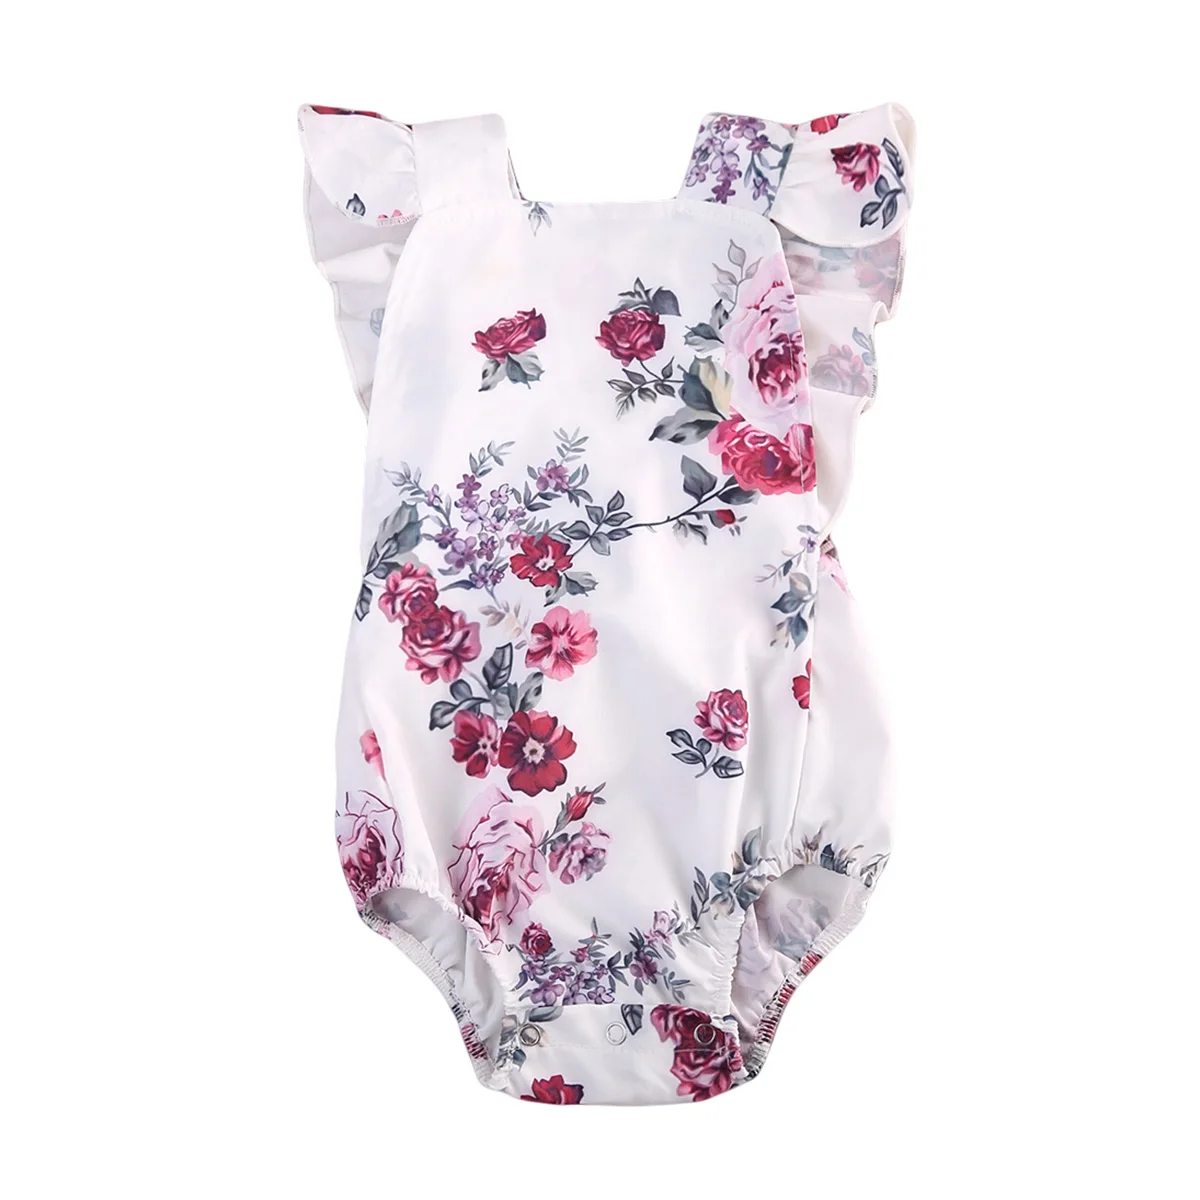 Lovely Purple Rose Newborn Infant Baby Girls Sleeveless Playsuit Romper Jumpsuit Outfit Clothes - Цвет: Белый